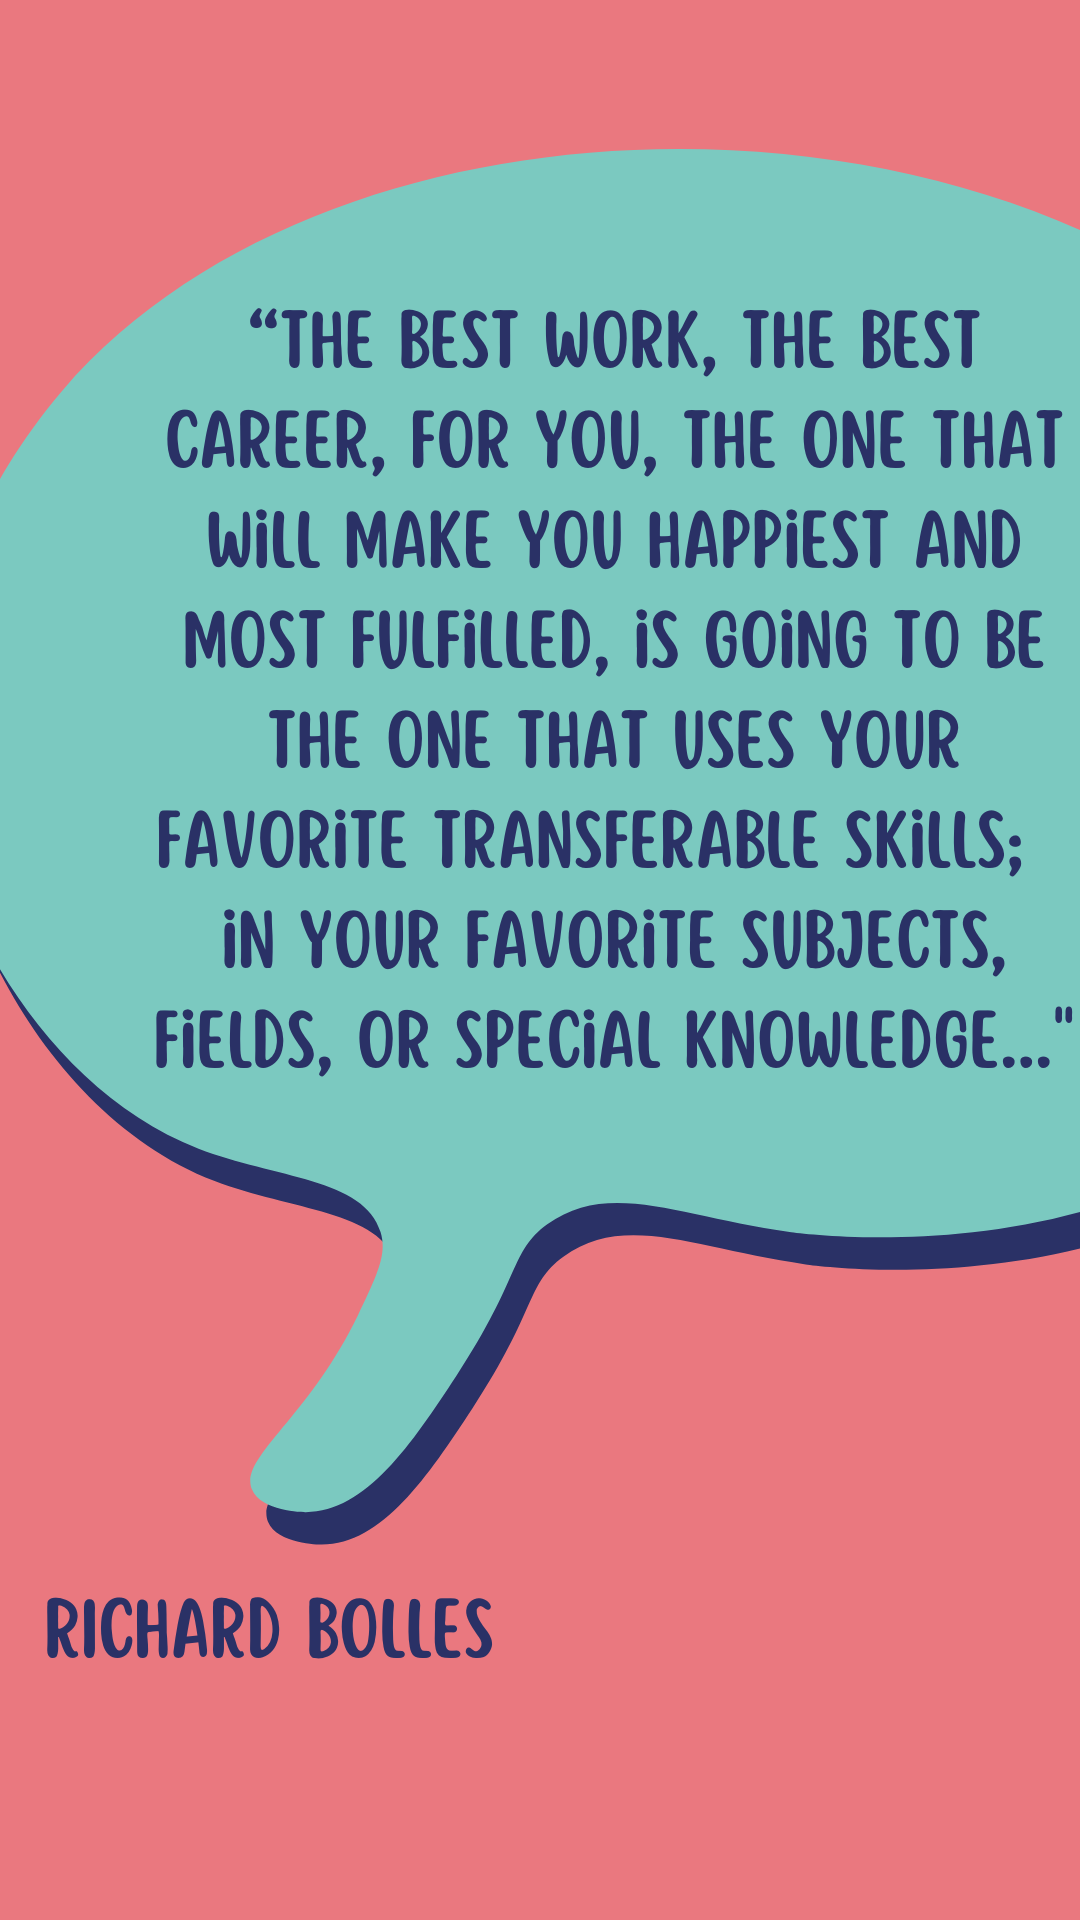 Author Richard Bolles says, “The best work, the best career, for you, the one that will make you happiest and most fulfilled, is going to be the one that uses your favorite transferable skills; in your favorite subjects, fields, or special knowledges.”